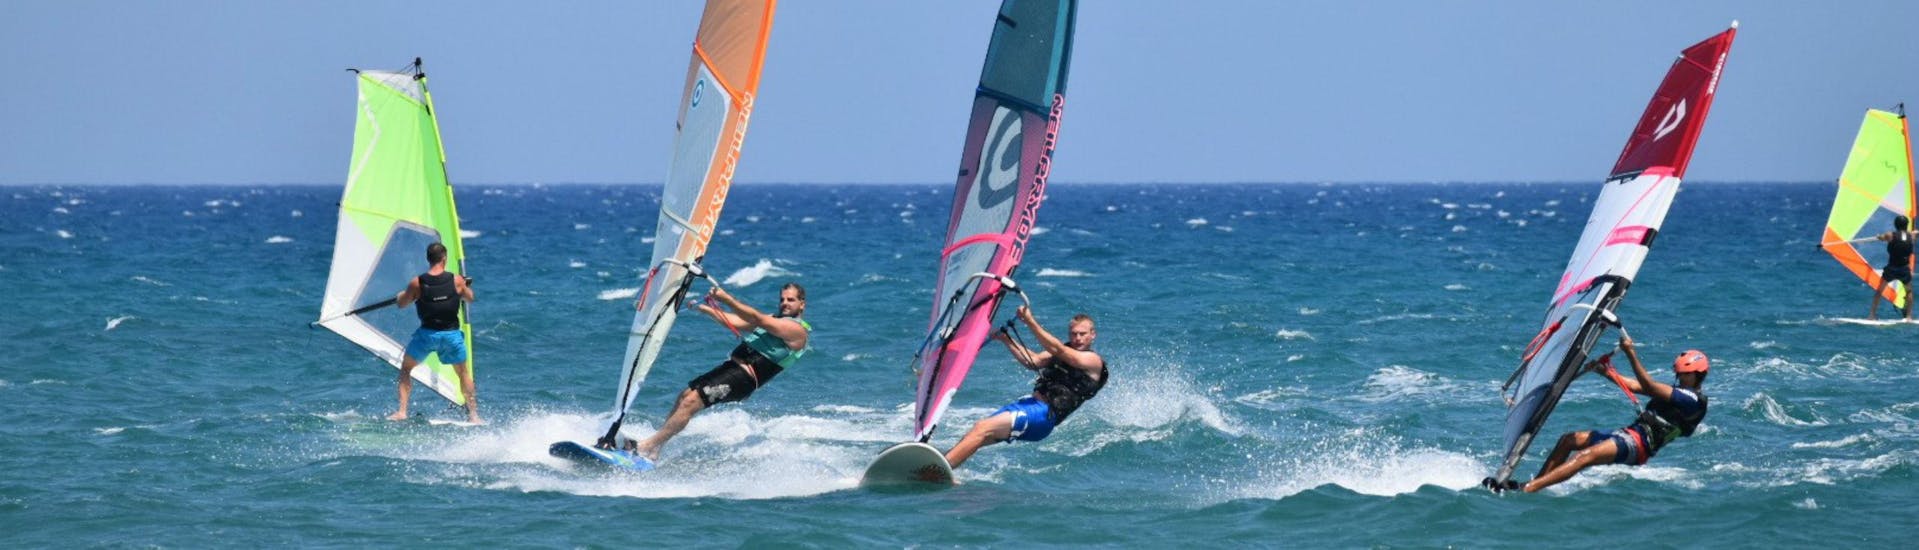 Private Windsurfing Lessons for Adults for Advanced Surfers with Windsurf City Cyprus - Hero image